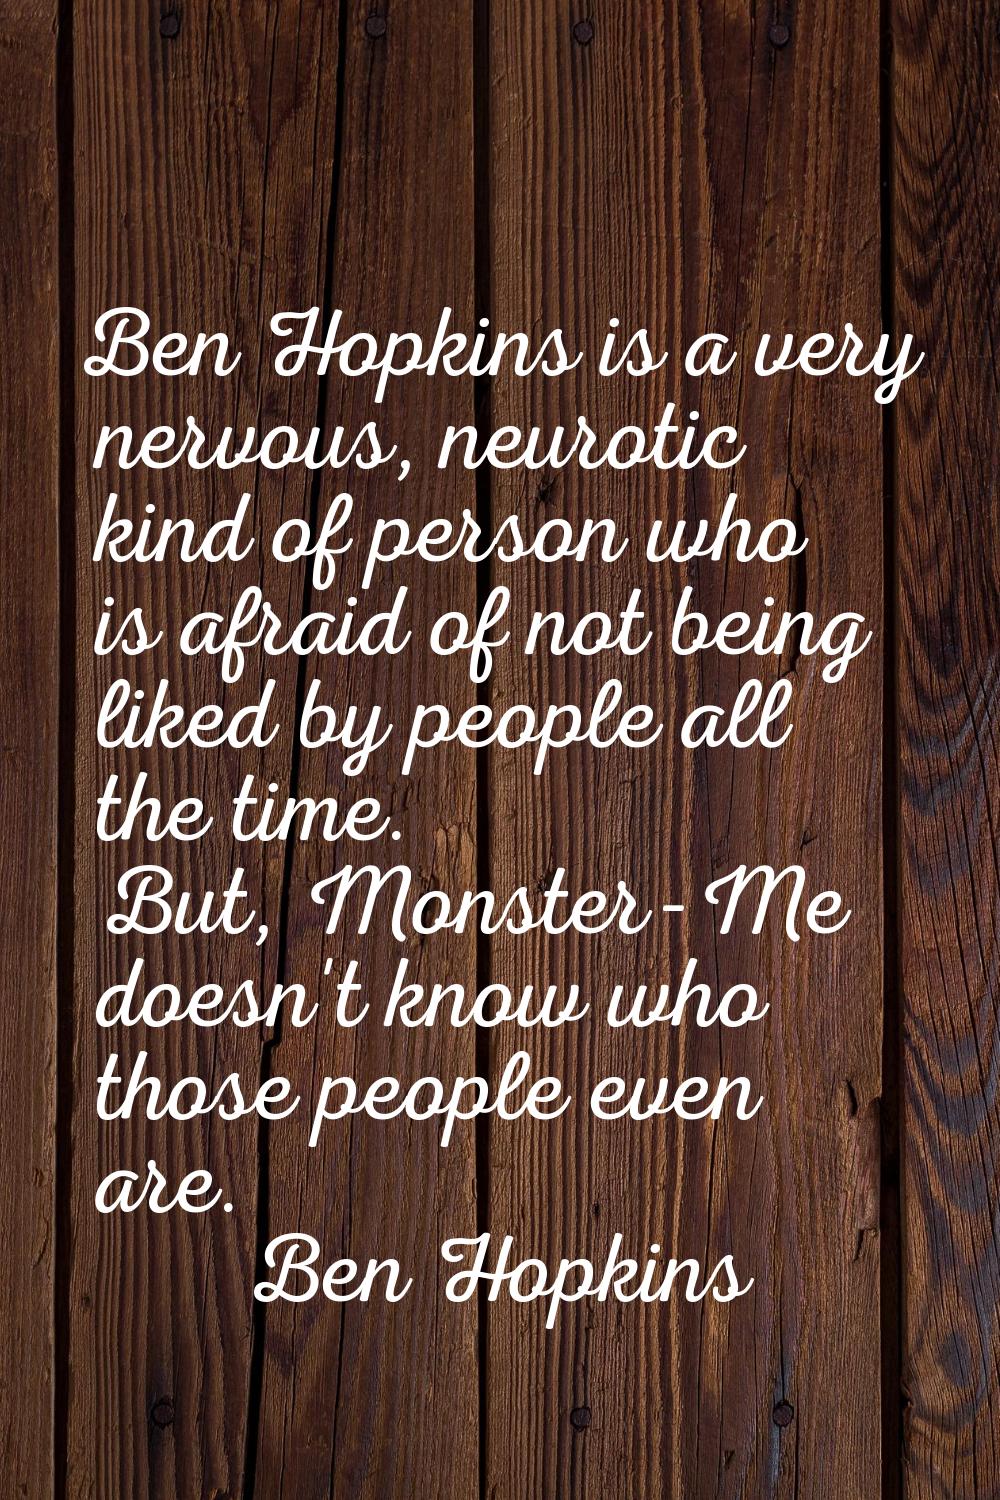 Ben Hopkins is a very nervous, neurotic kind of person who is afraid of not being liked by people a